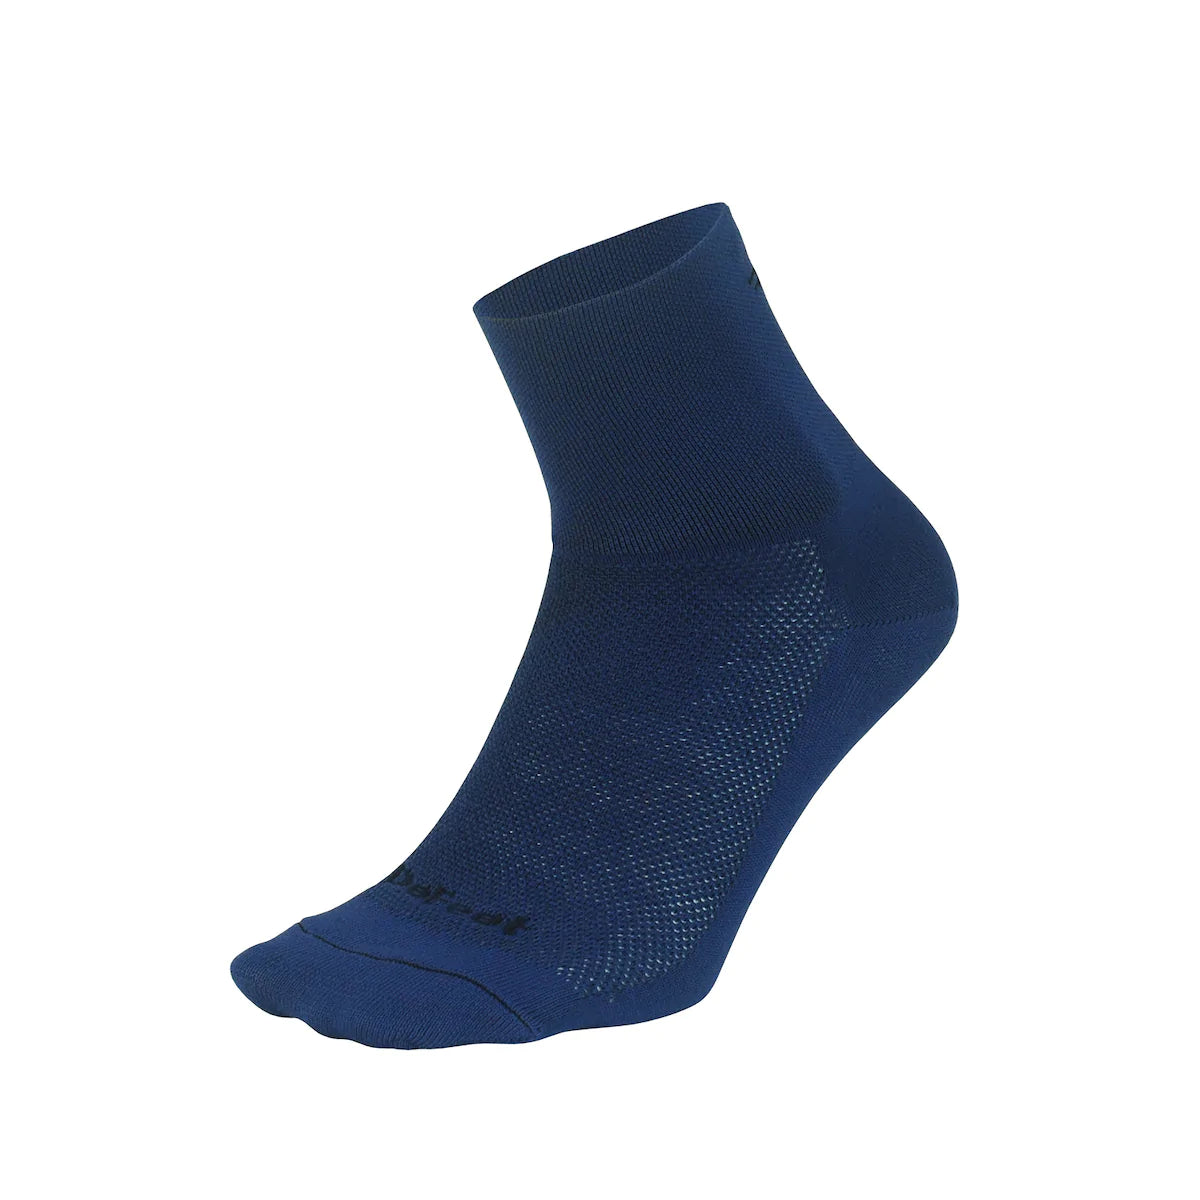 Aireator 3" cuff cycling sock in navy with small black d-logo on back of cuff